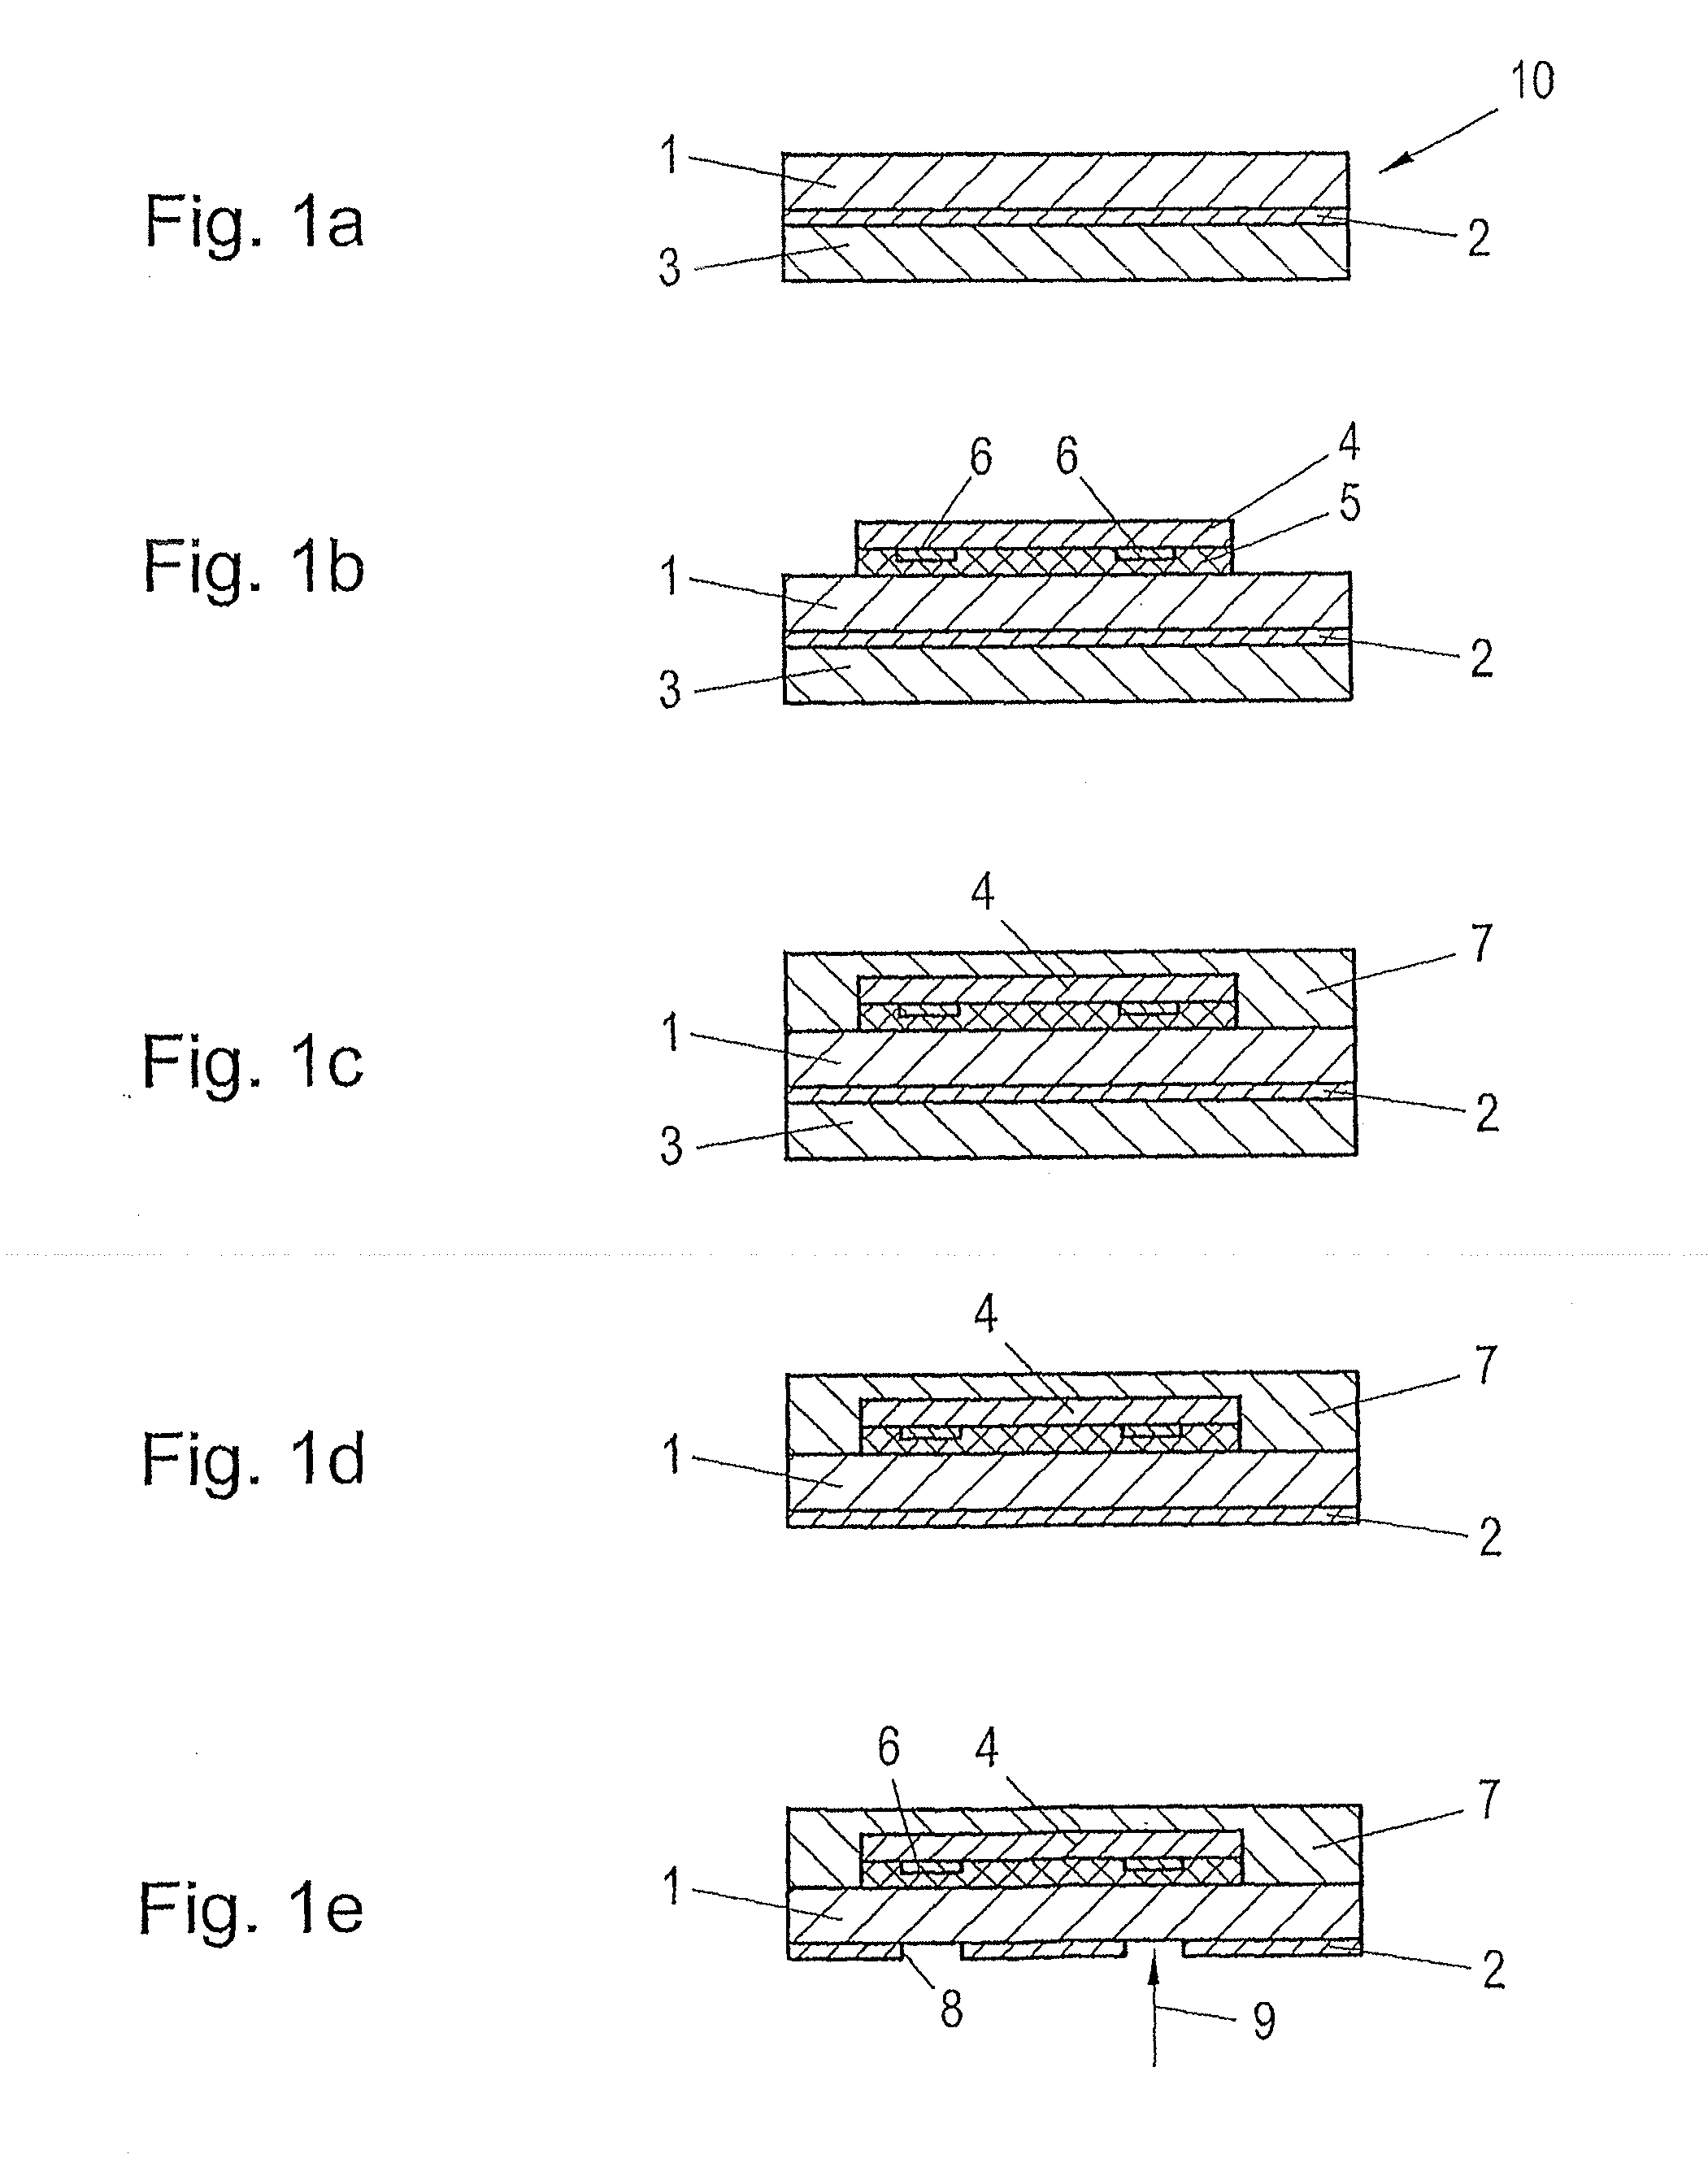 Method for integrating an electronic component into a printed circuit board